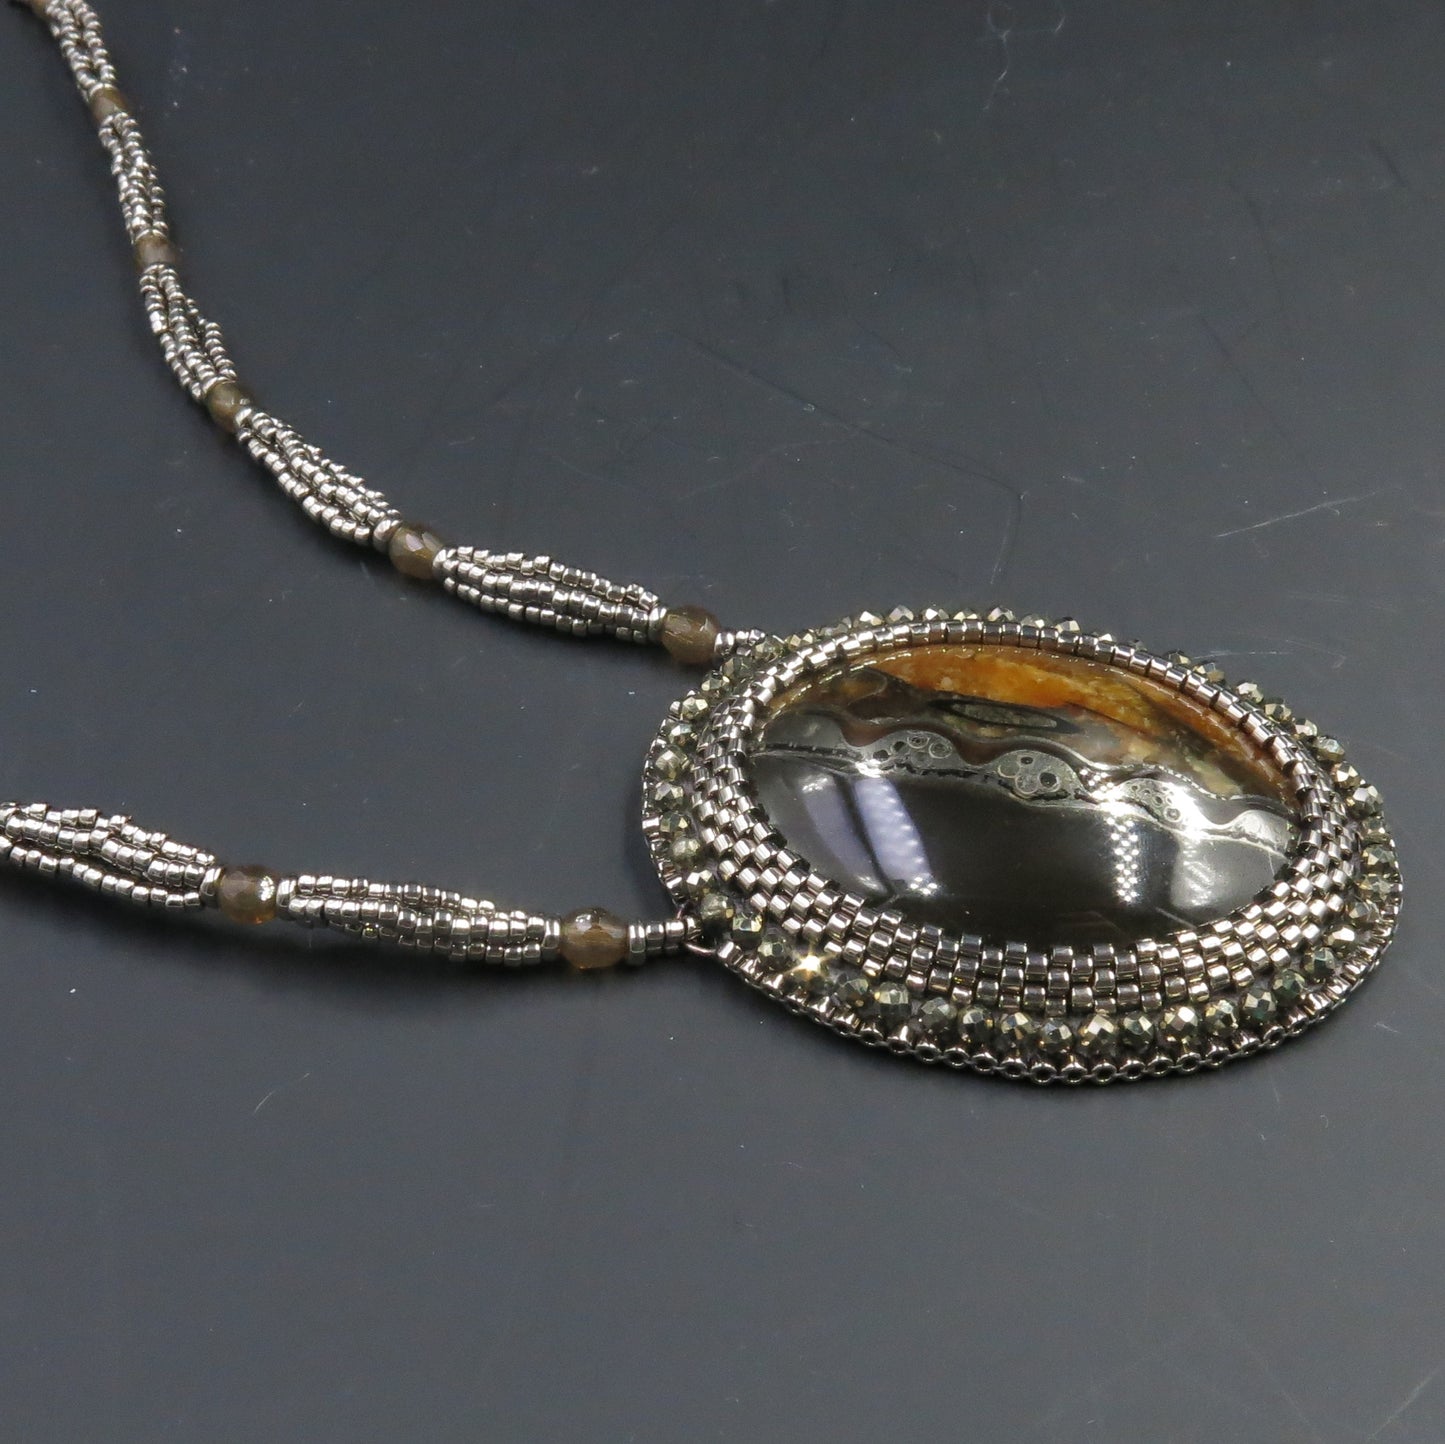 Necklace with pyritized ammonite and yellow calcite